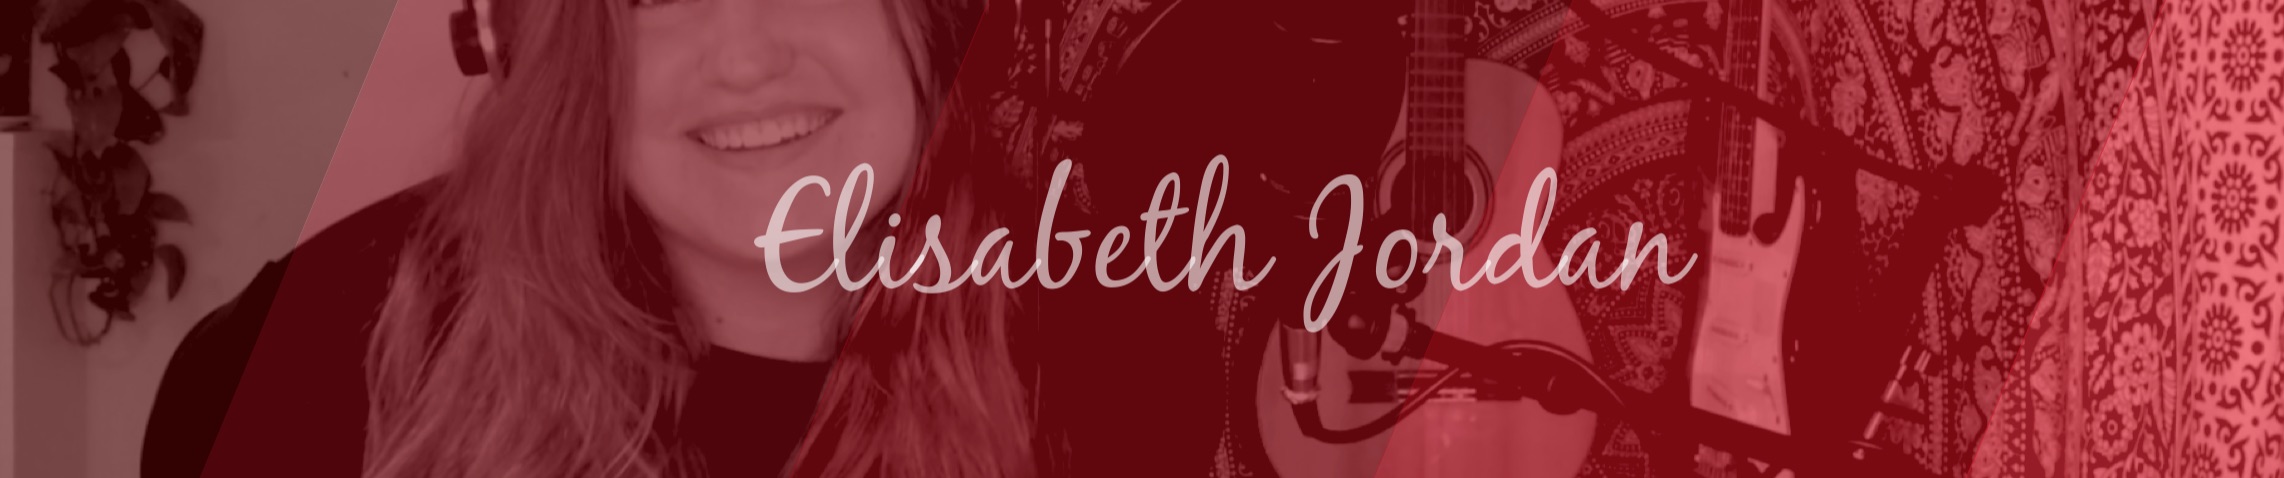 Stream Elisabeth Jordan music | Listen to songs, albums, playlists for free  on SoundCloud